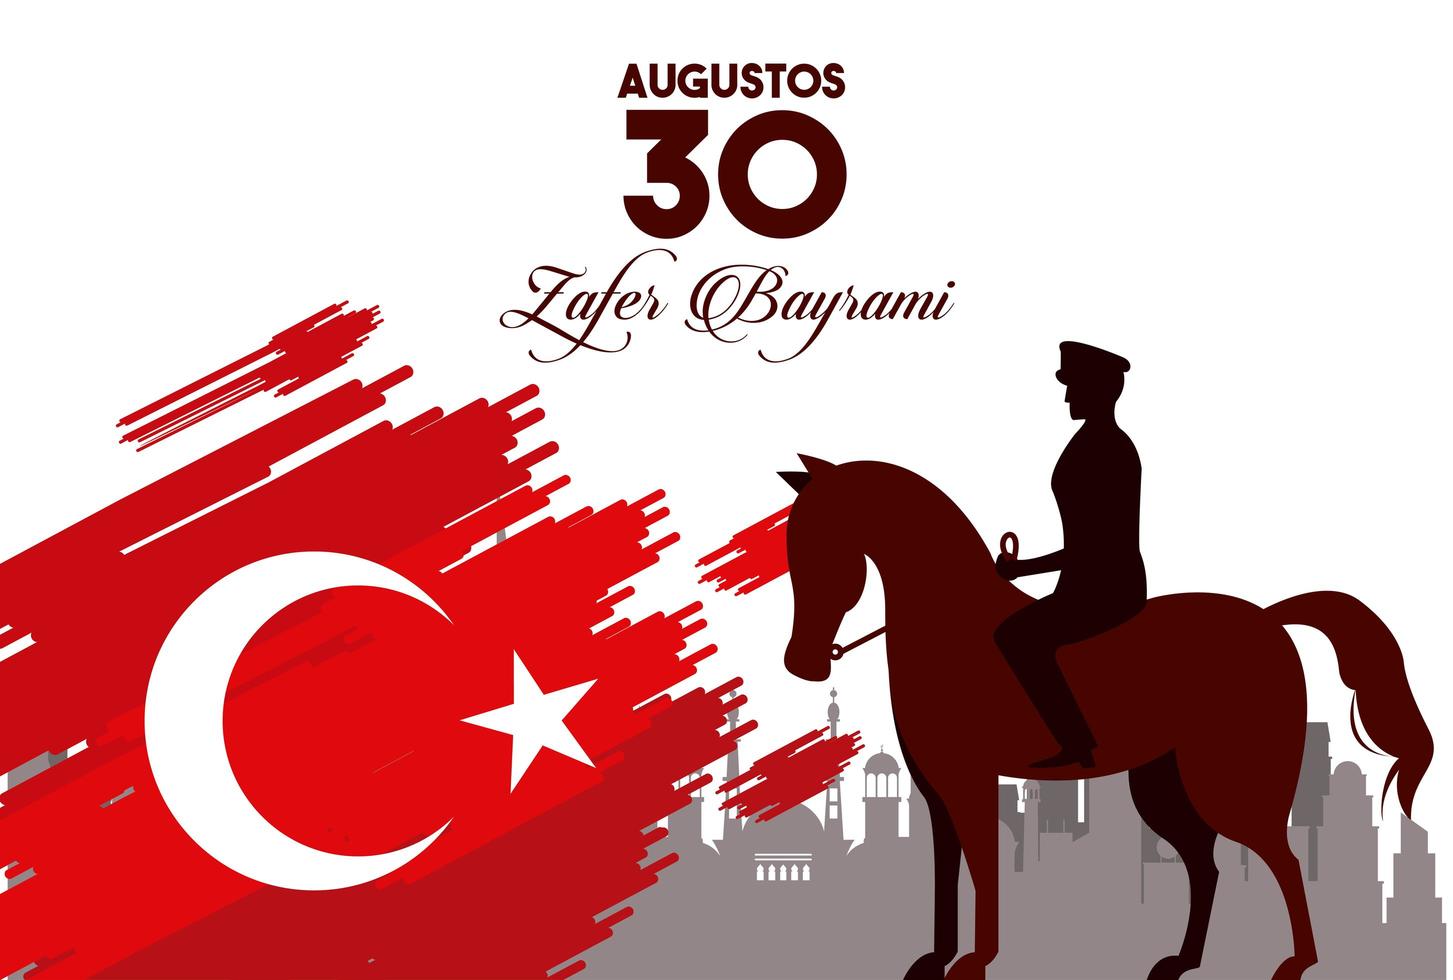 zafer bayrami celebration with soldier in horse and flag on the city vector